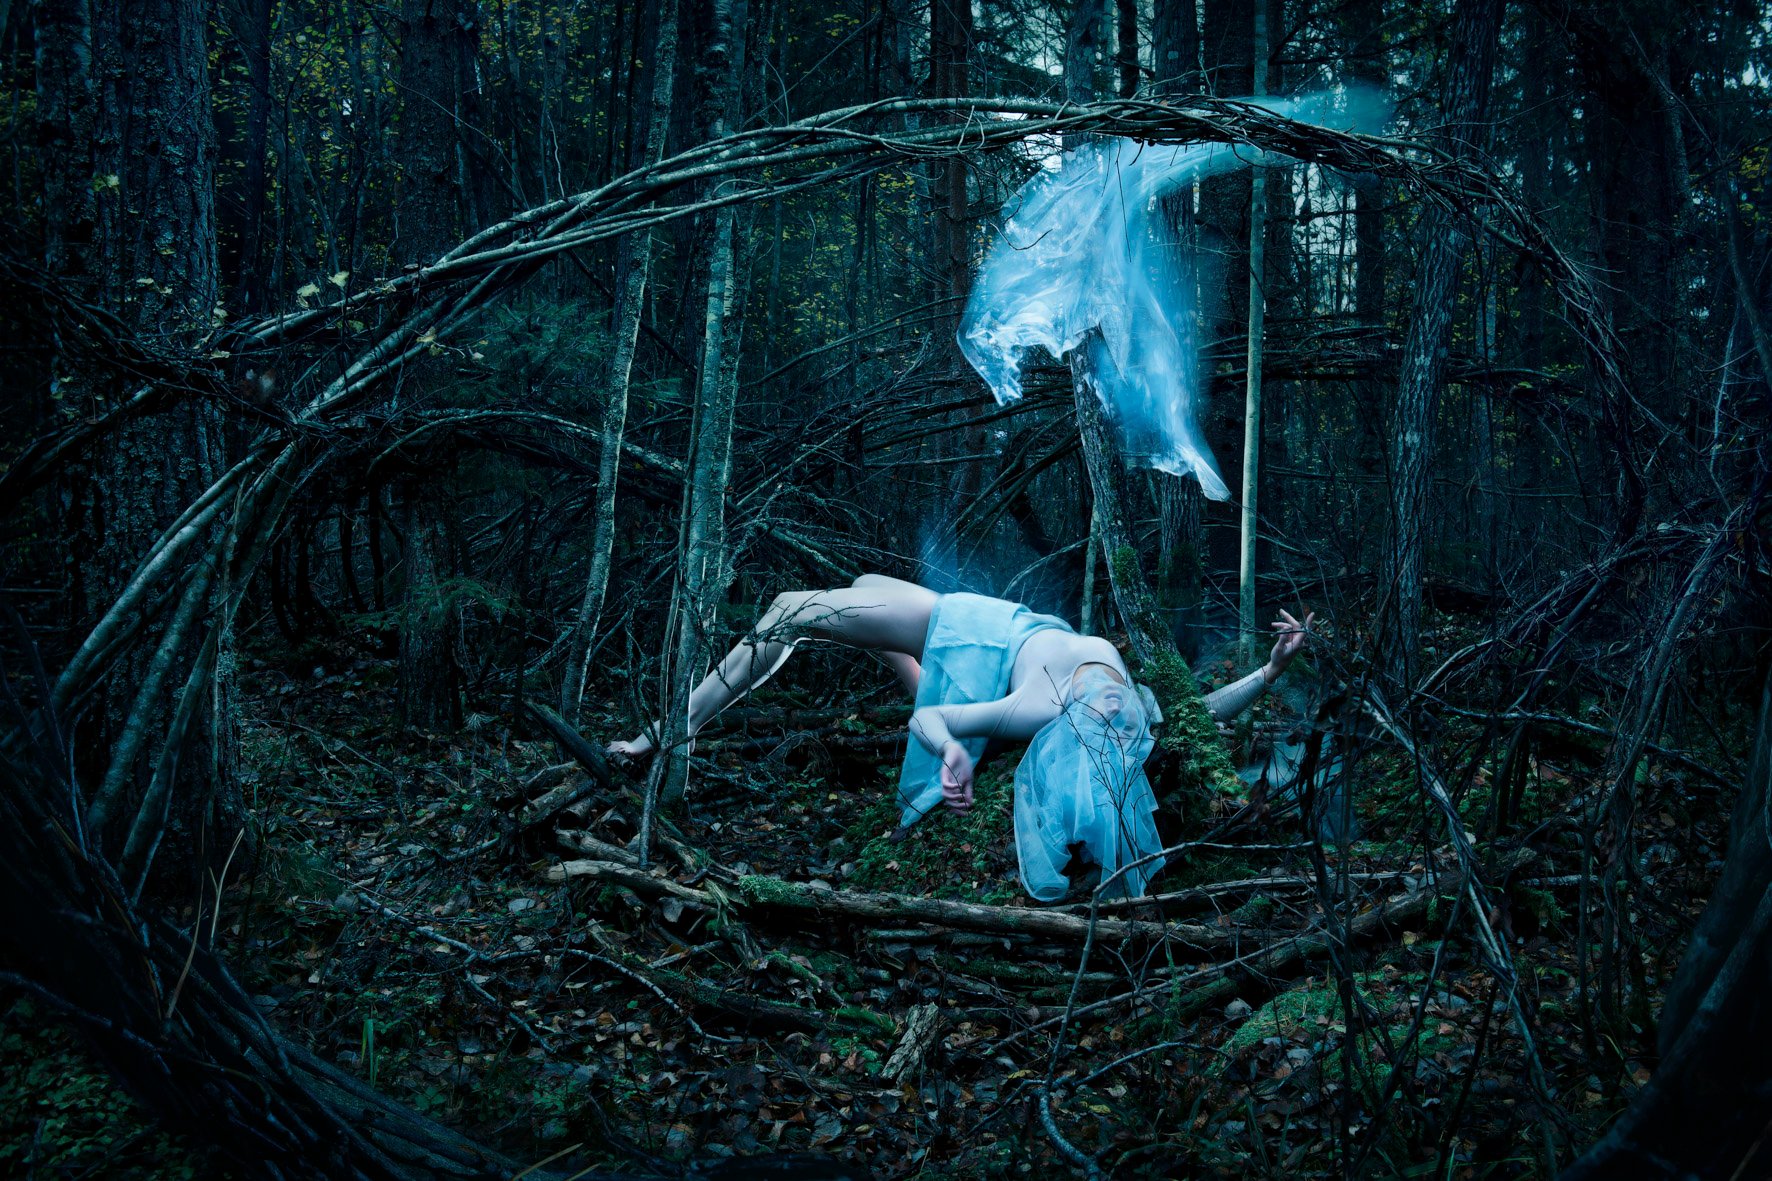 Natalie Field conceptual photography